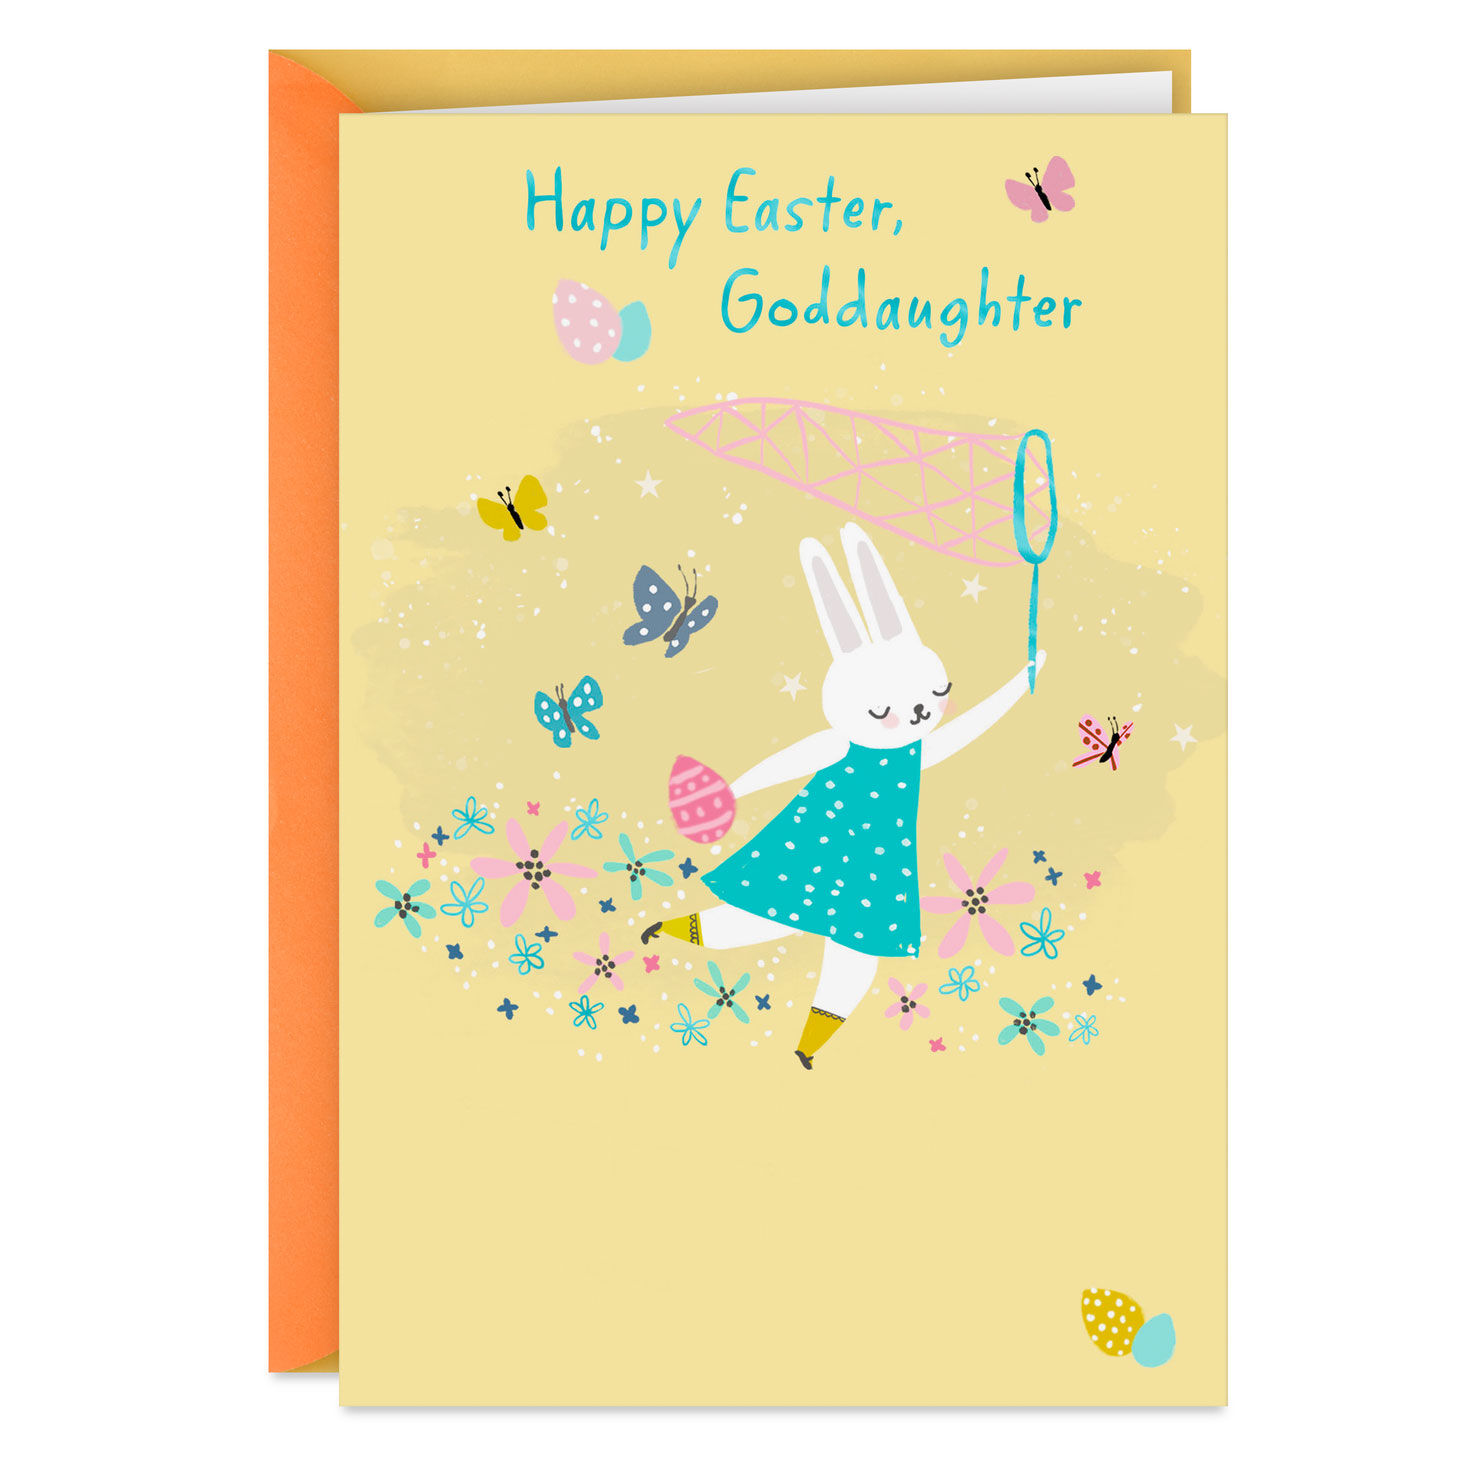 You're One of My Favorites Easter Card for Goddaughter for only USD 2.99 | Hallmark